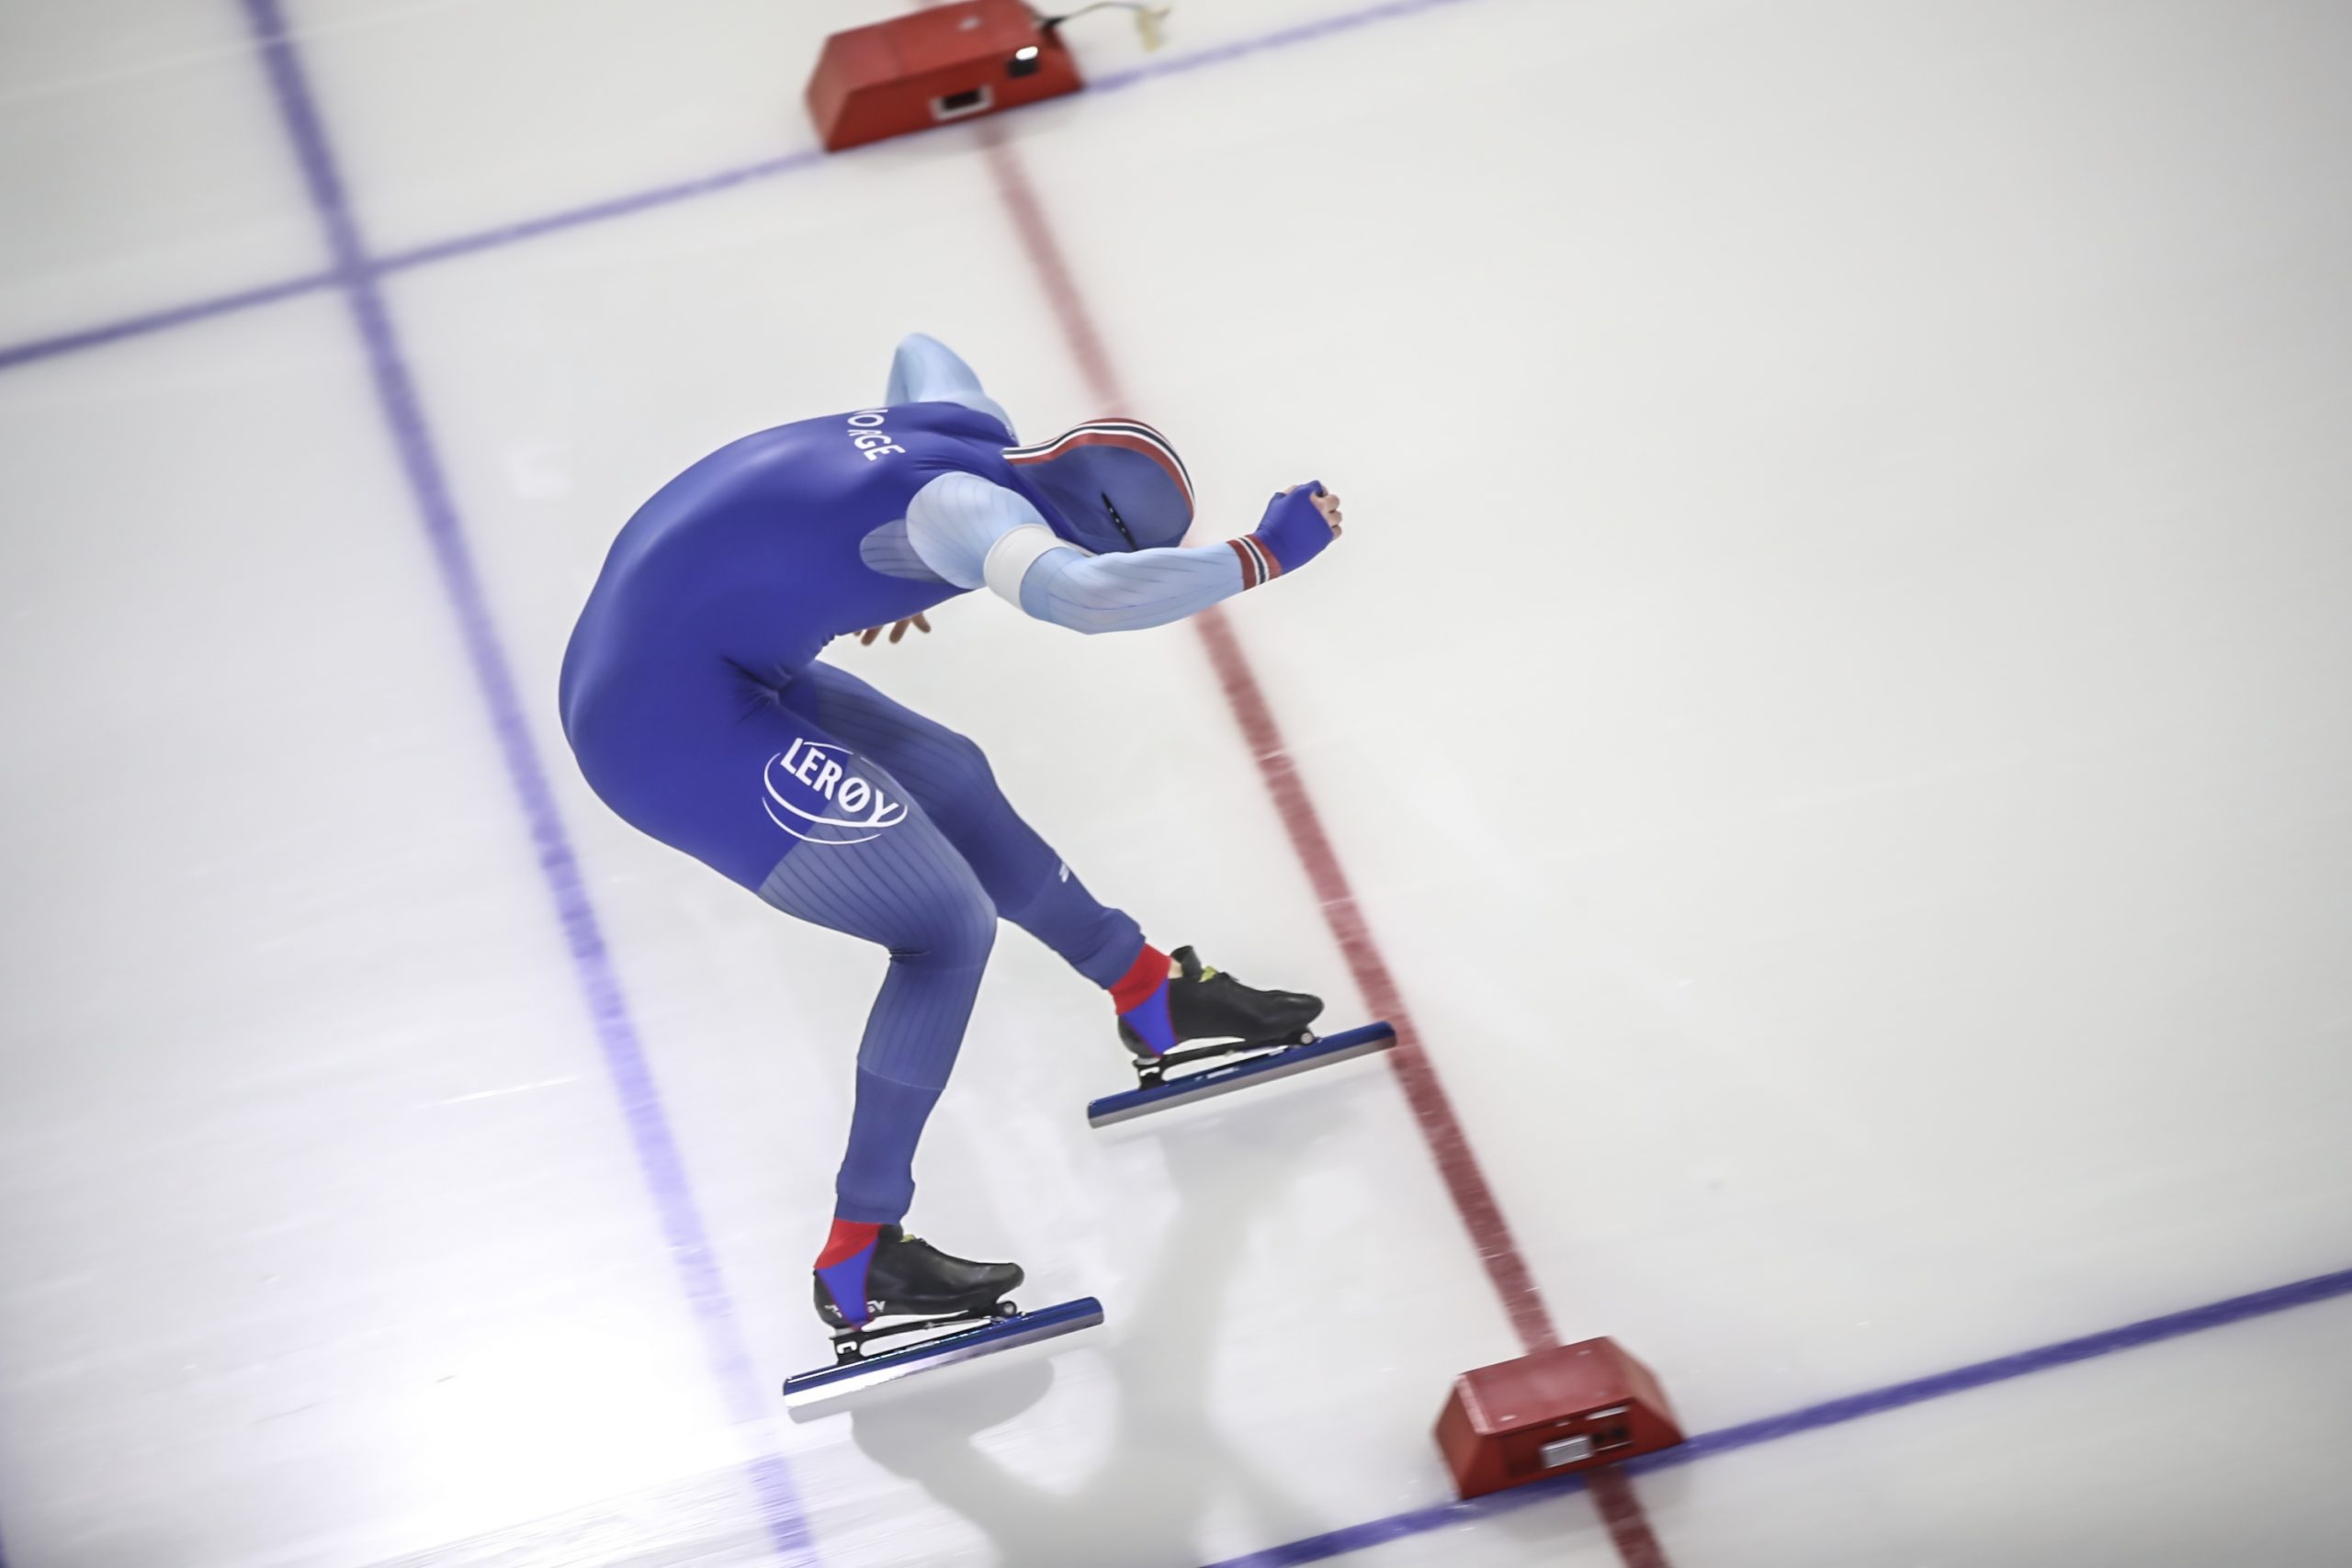 Speed Skating: Short track, Rink, Olympic individual race, 1500 meters, High speed. 2560x1710 HD Wallpaper.